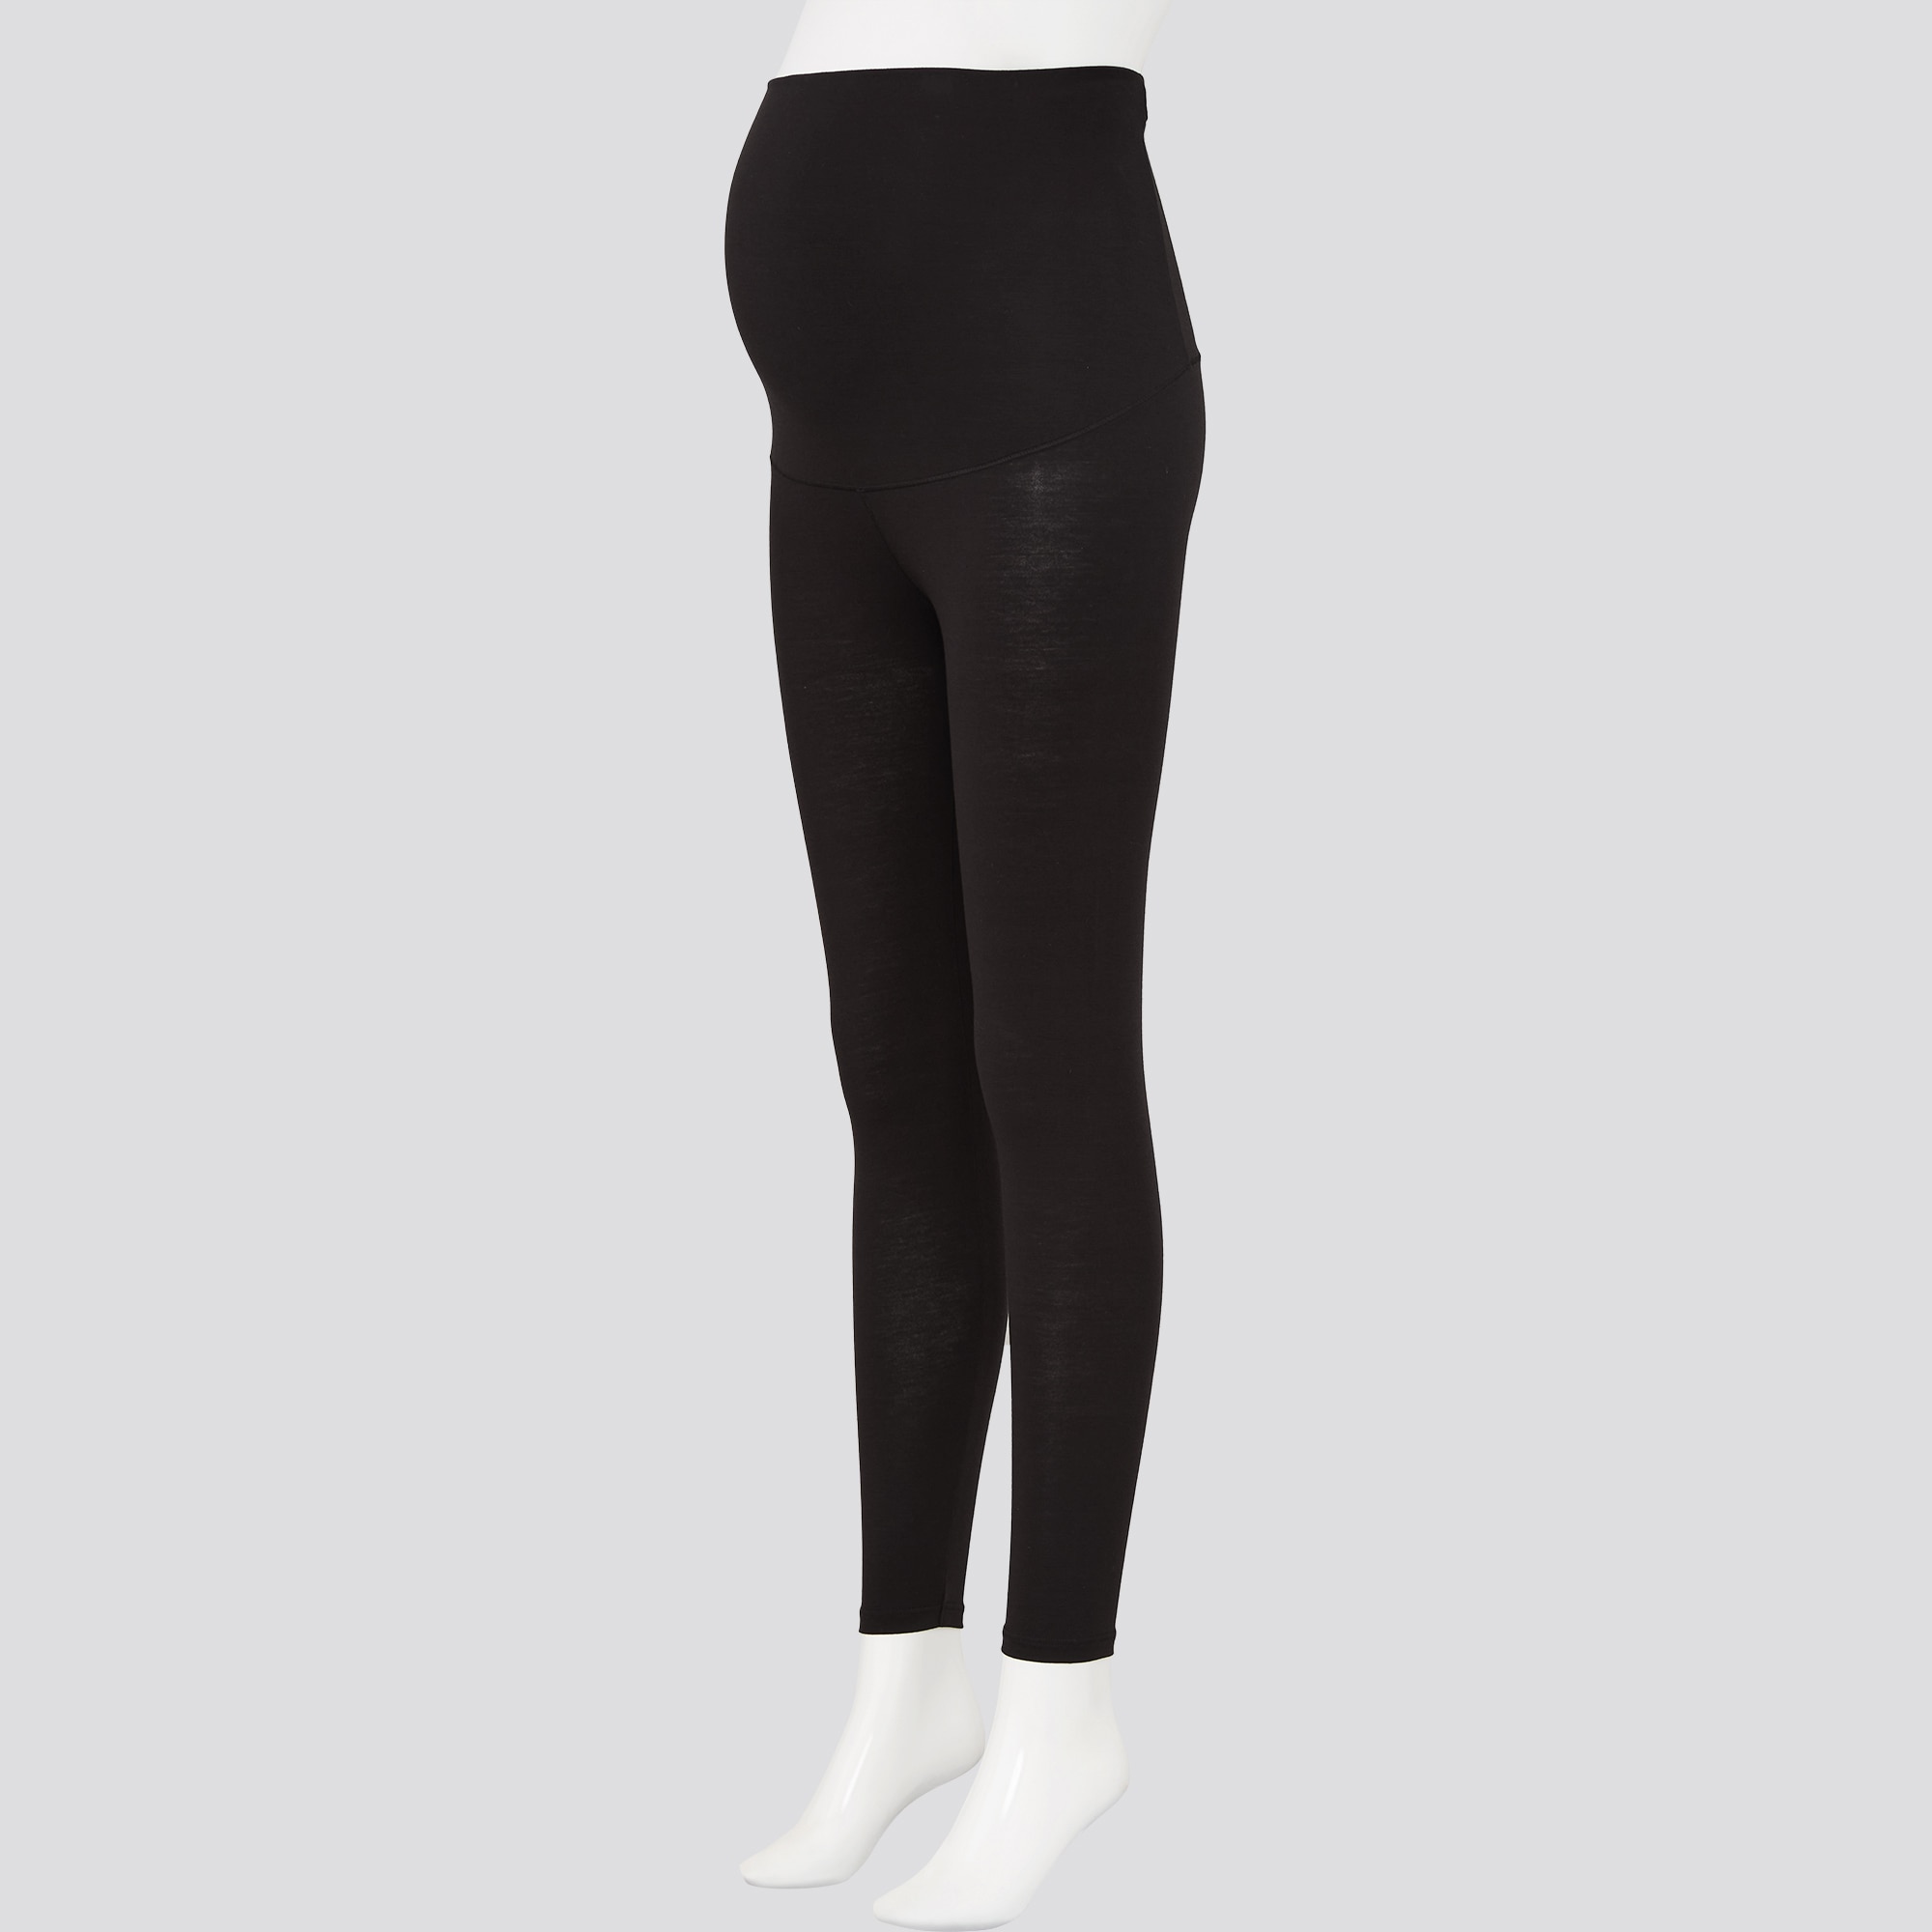 Uniqlo Maternity Leggings Reviewers